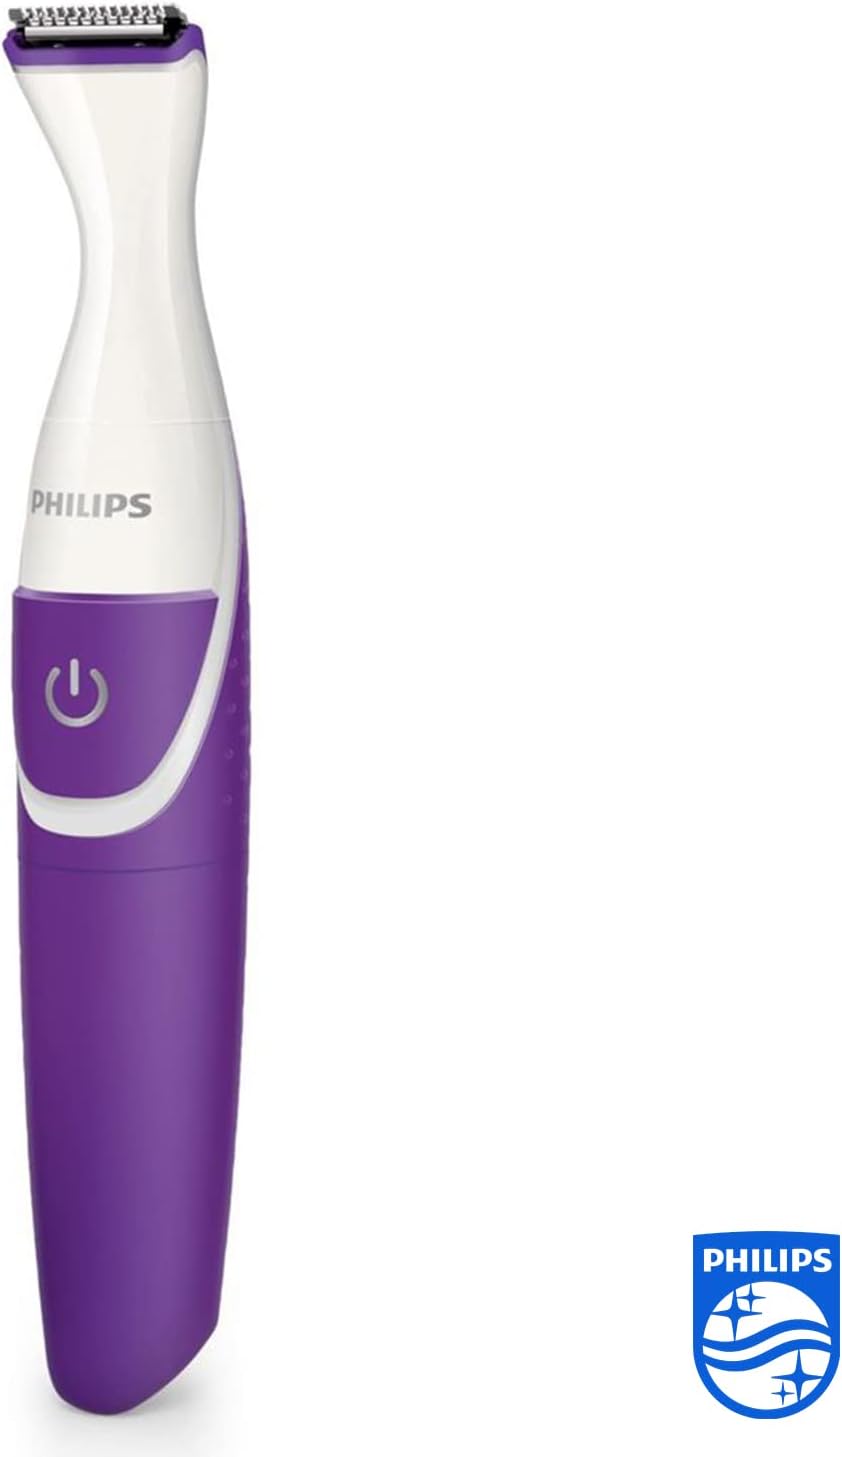 Philips BikiniGenie BRT383/15 - Handy Bikini Trimmer for Trimming, Shaving and Styling The Bikini Zone with Comb attachments and Shaving Heads - for Effortless Hair Removal